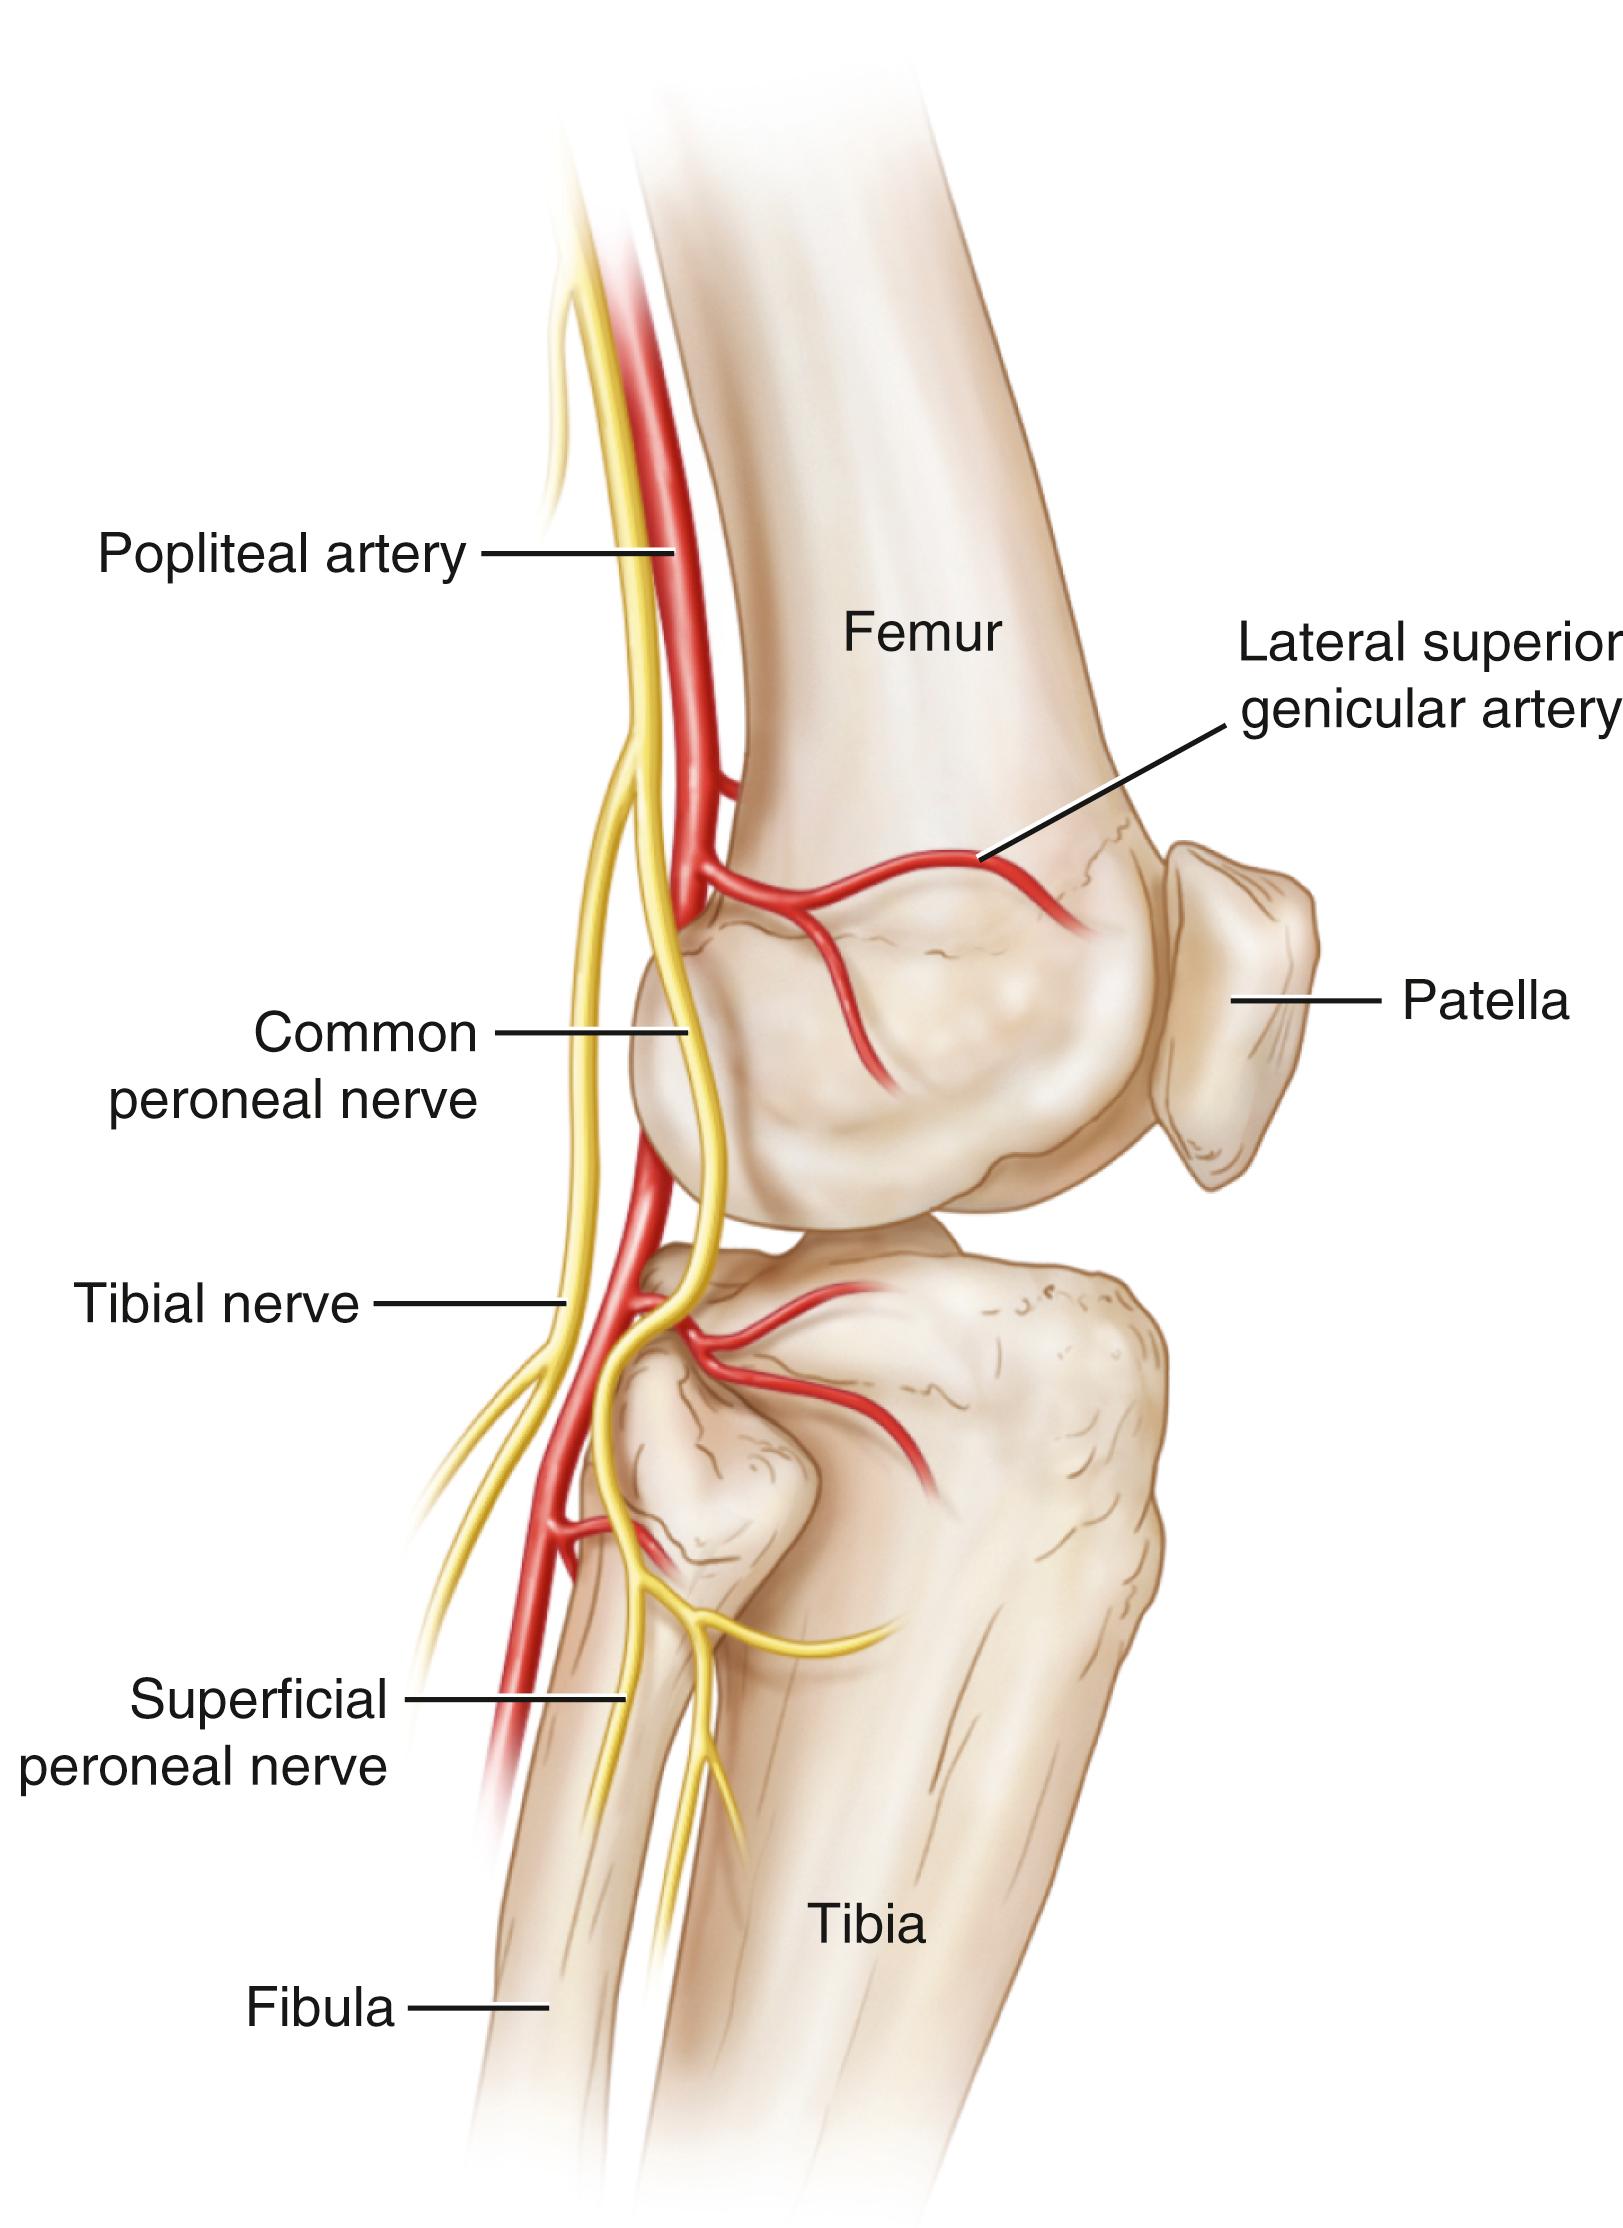 FIG. 173.5, Lateral view of the knee demonstrating the relative location of the superior lateral genicular nerve and the inferior lateral genicular nerve and their corresponding articular arteries.